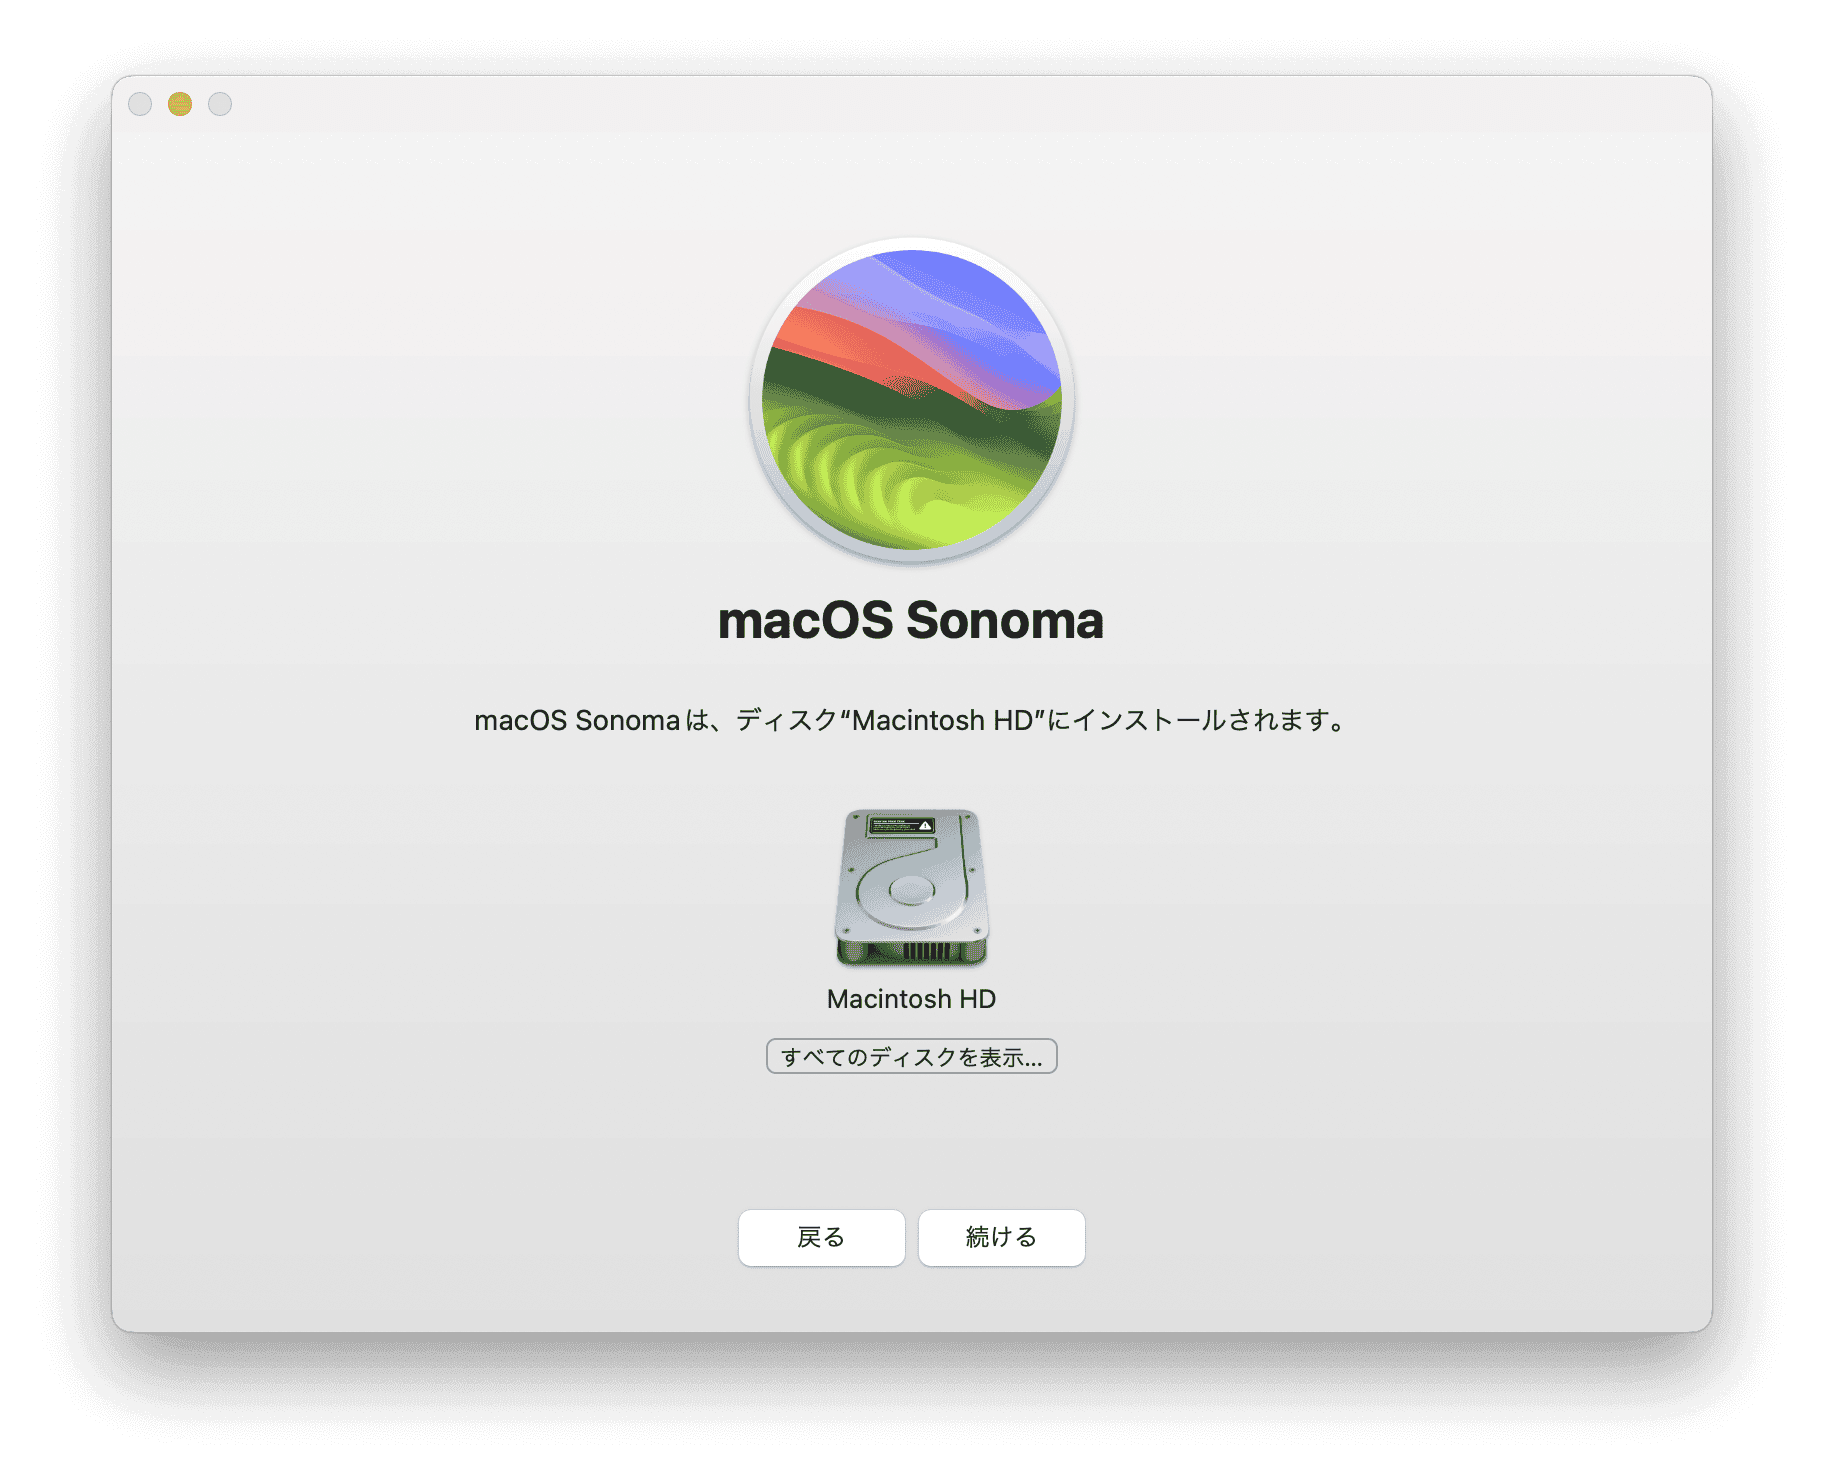 install-macos-sonoma-on-a-partion-jp.png